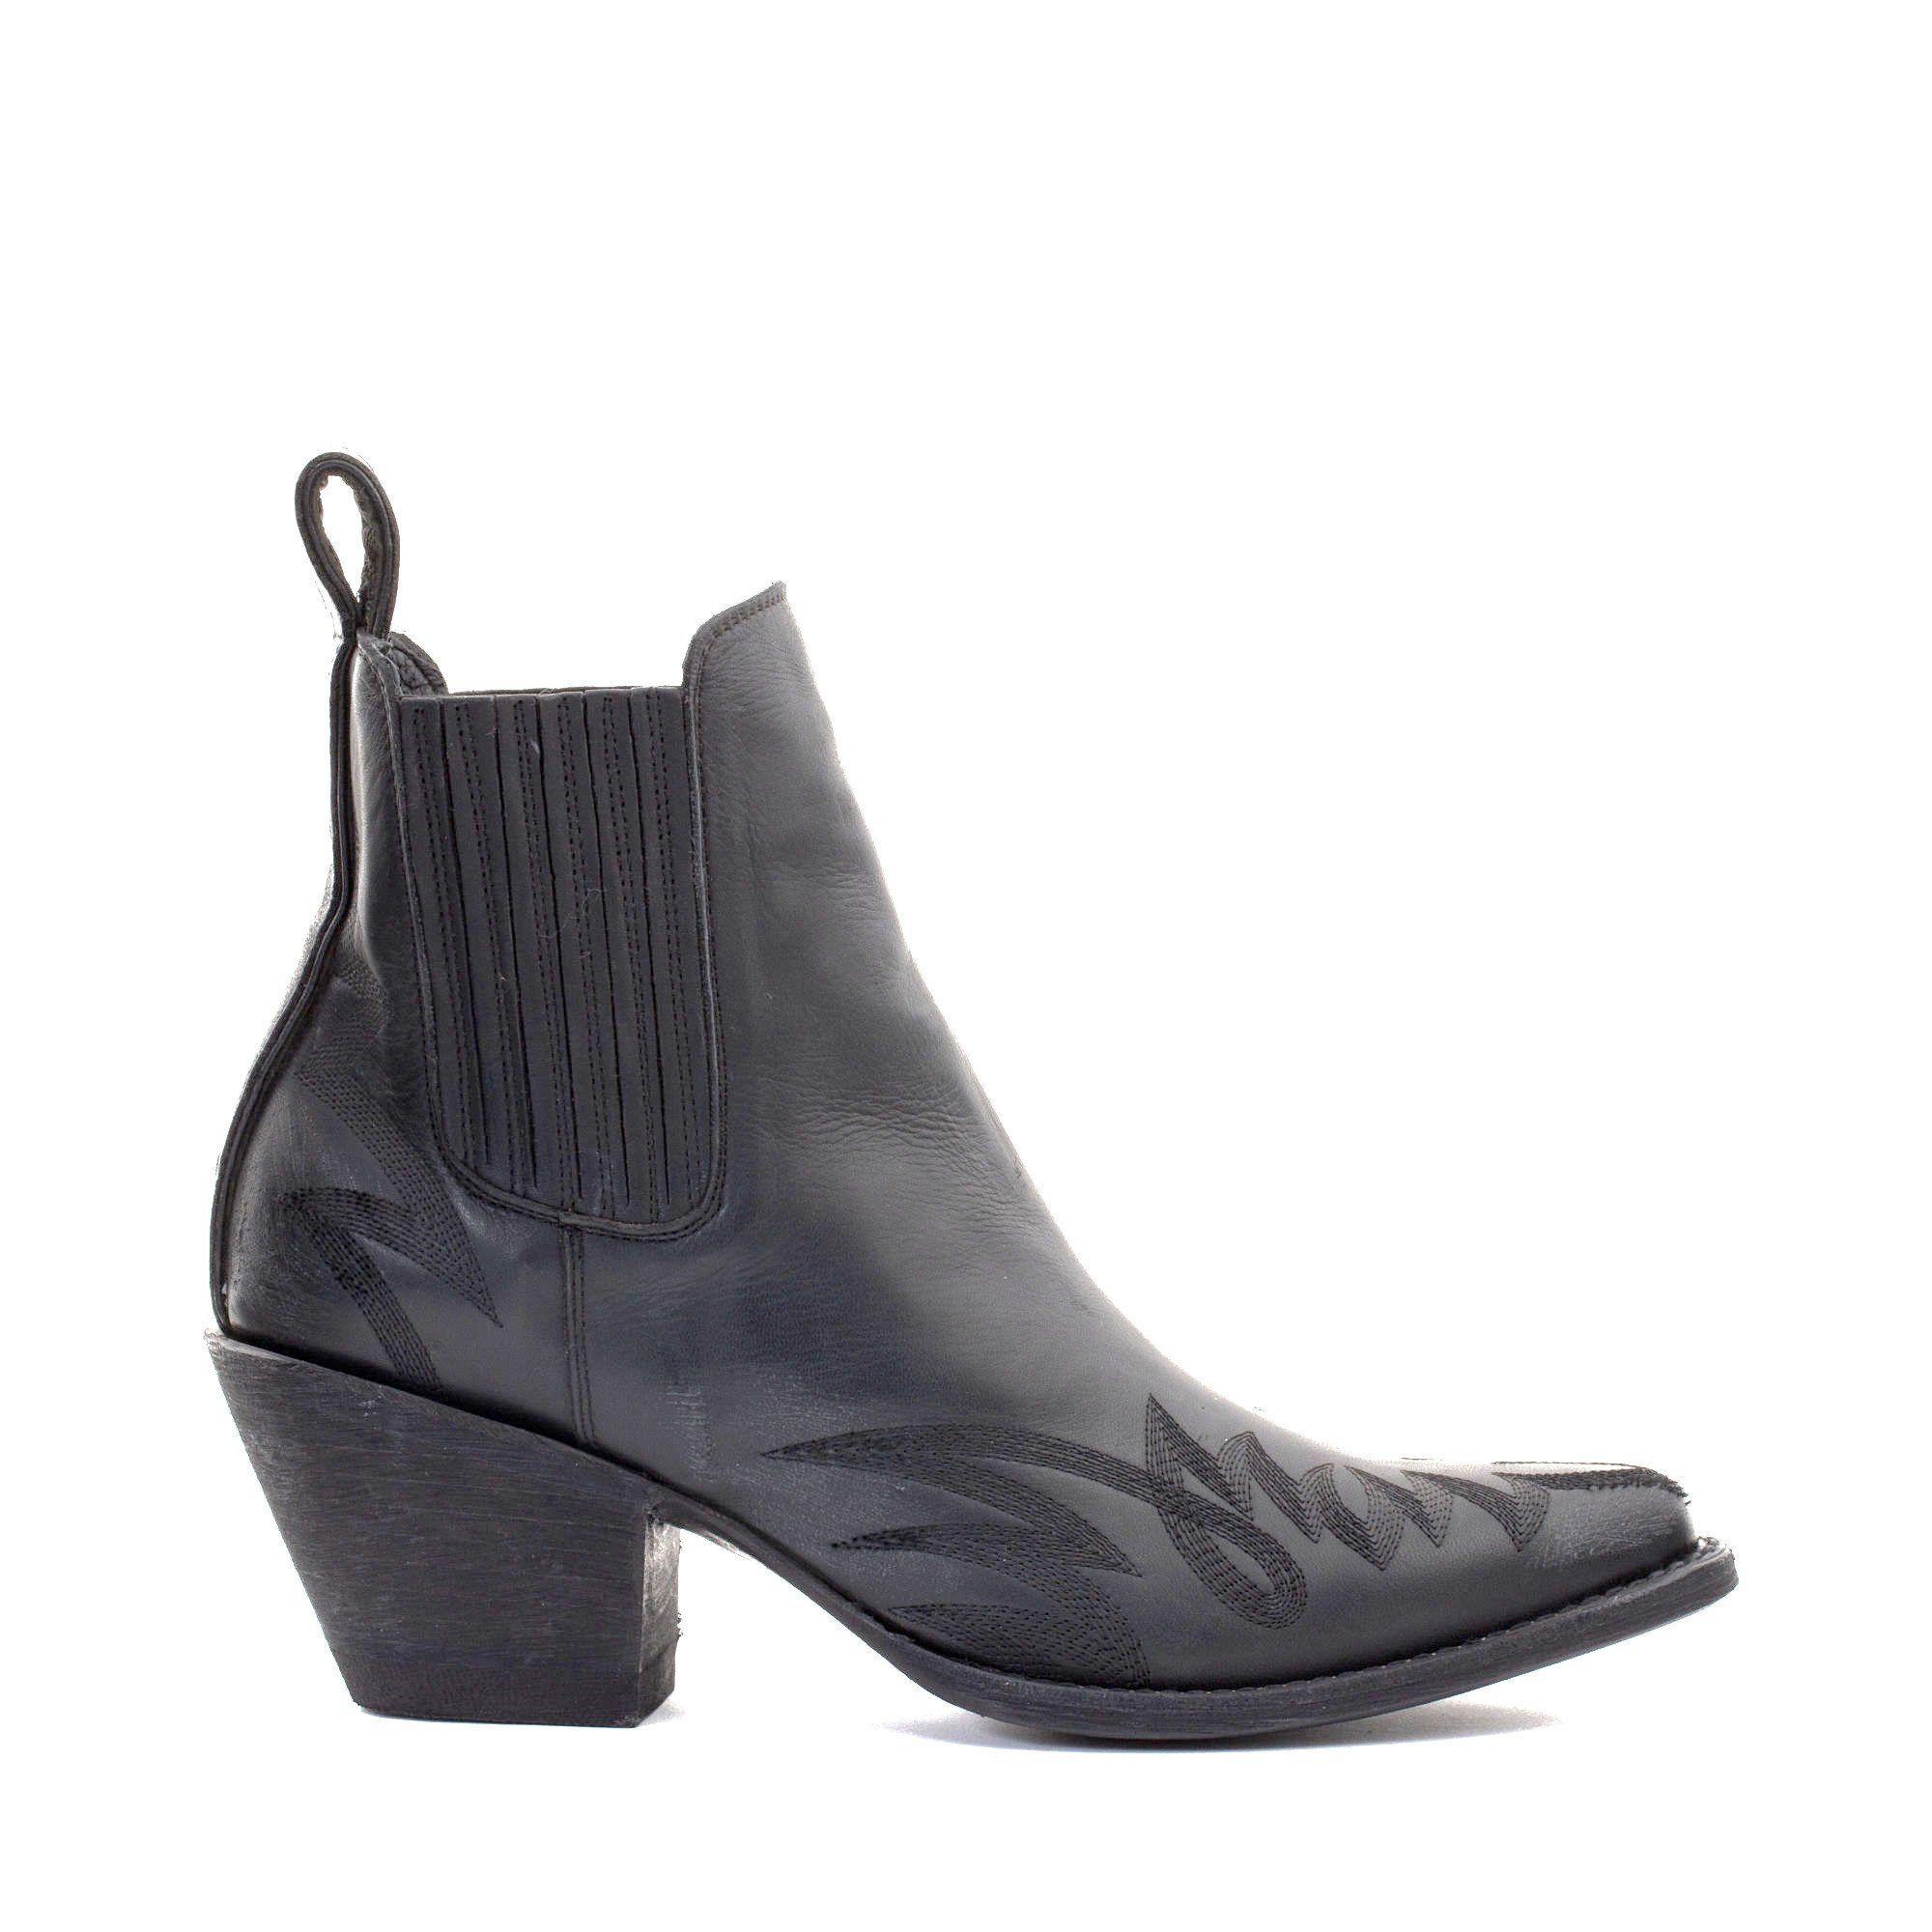 GAUCHO BLACK POINTED TOE ANKLE BOOTS FEATURING FLAMING  STITCHING, ELASTICIZED SIDES COVERED WITH LEATHER  Total heel height 2.6